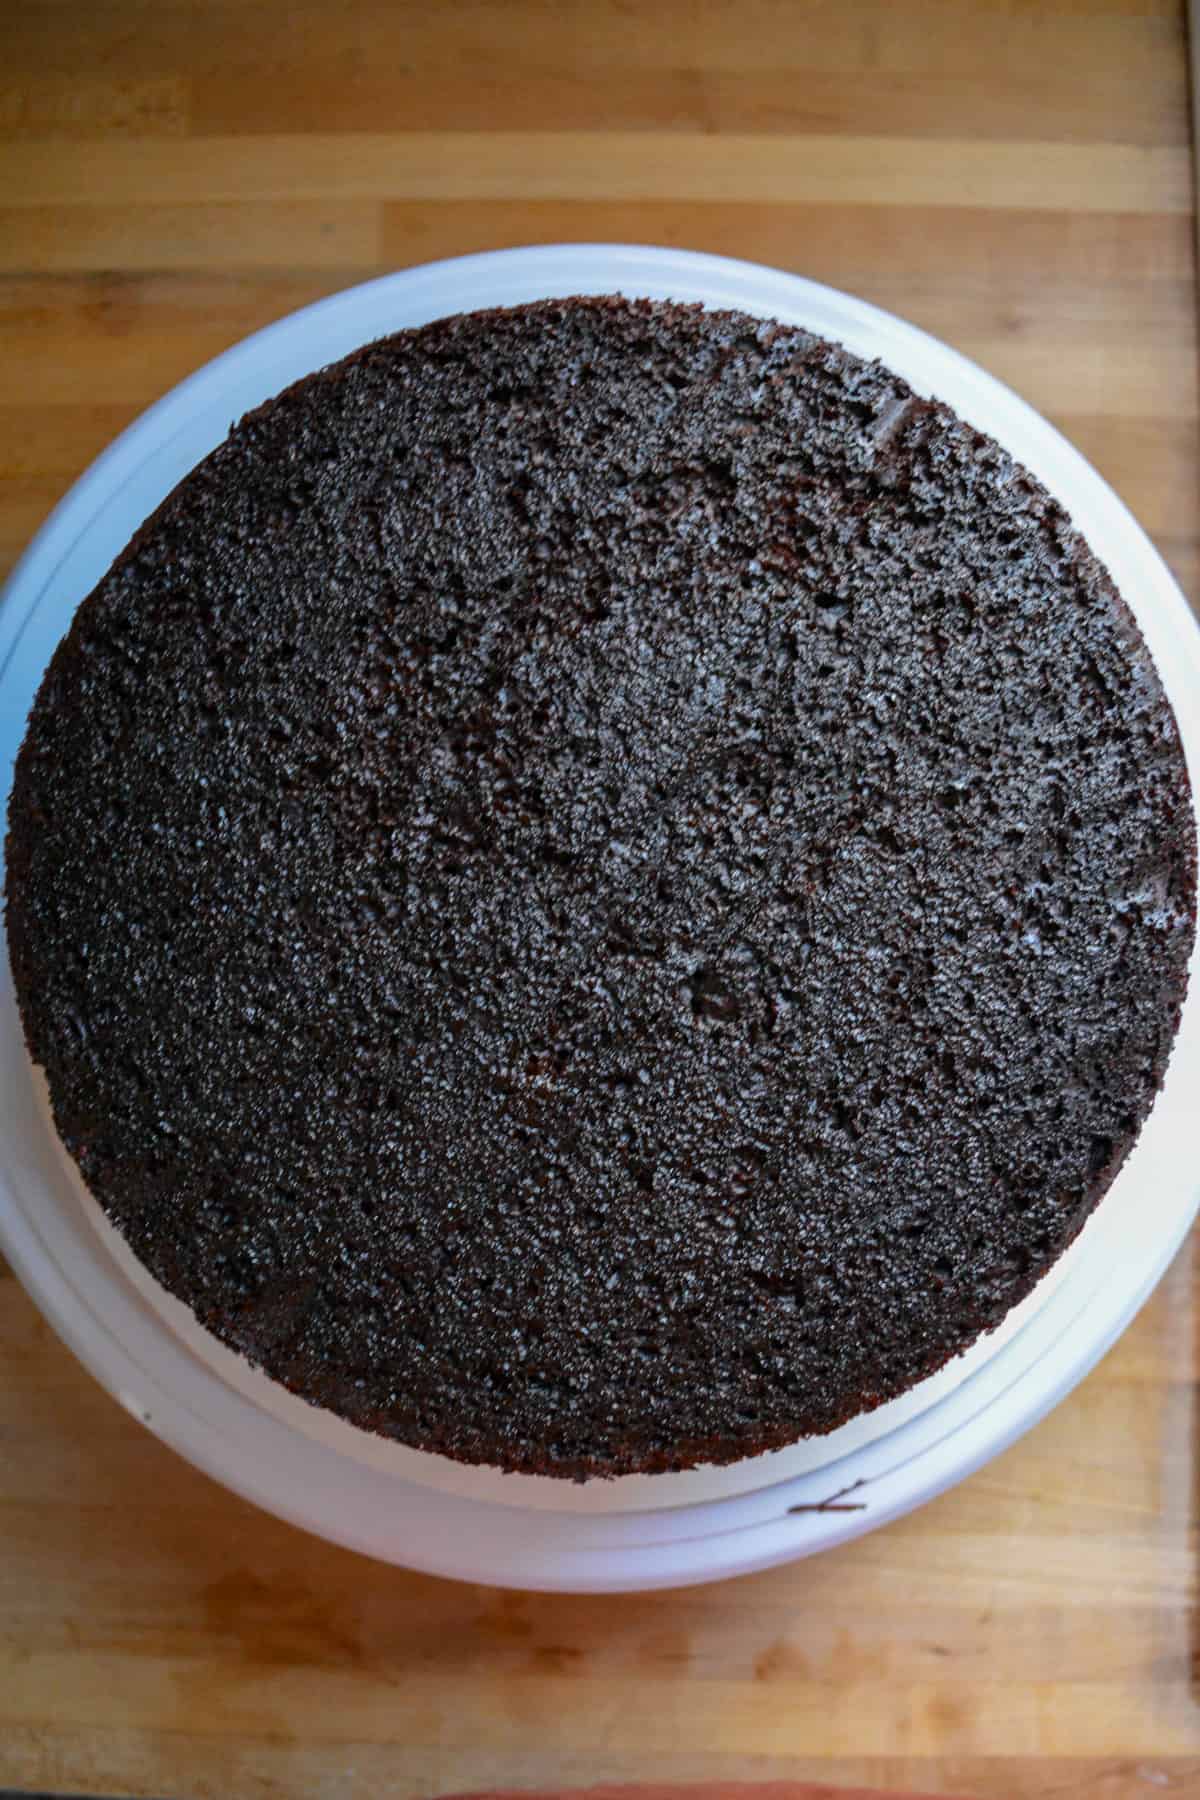 Another chocolate cake layer added to the top of the fudge layer.